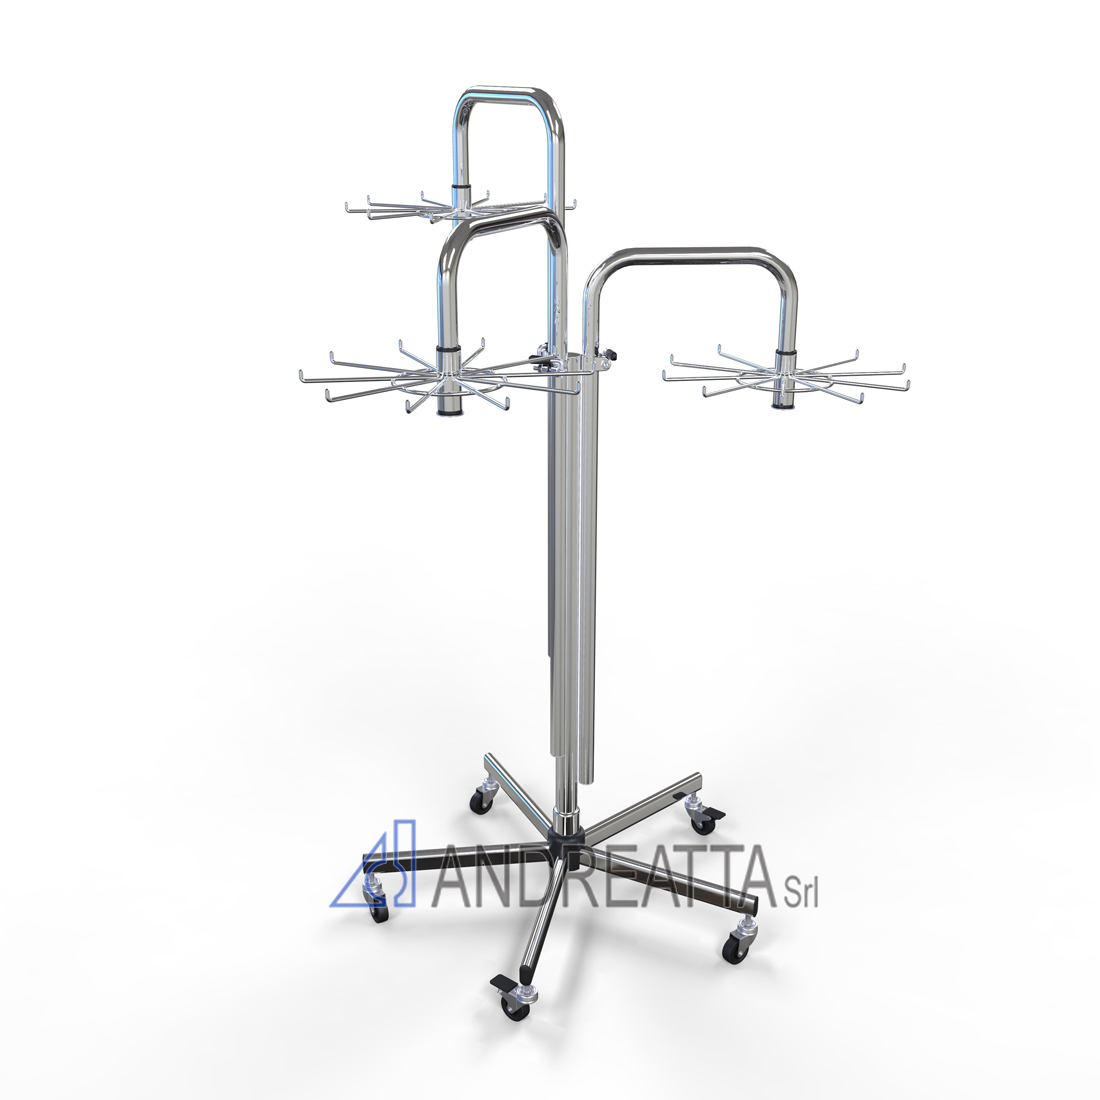 3 arms accessory stand, Adjustable in height